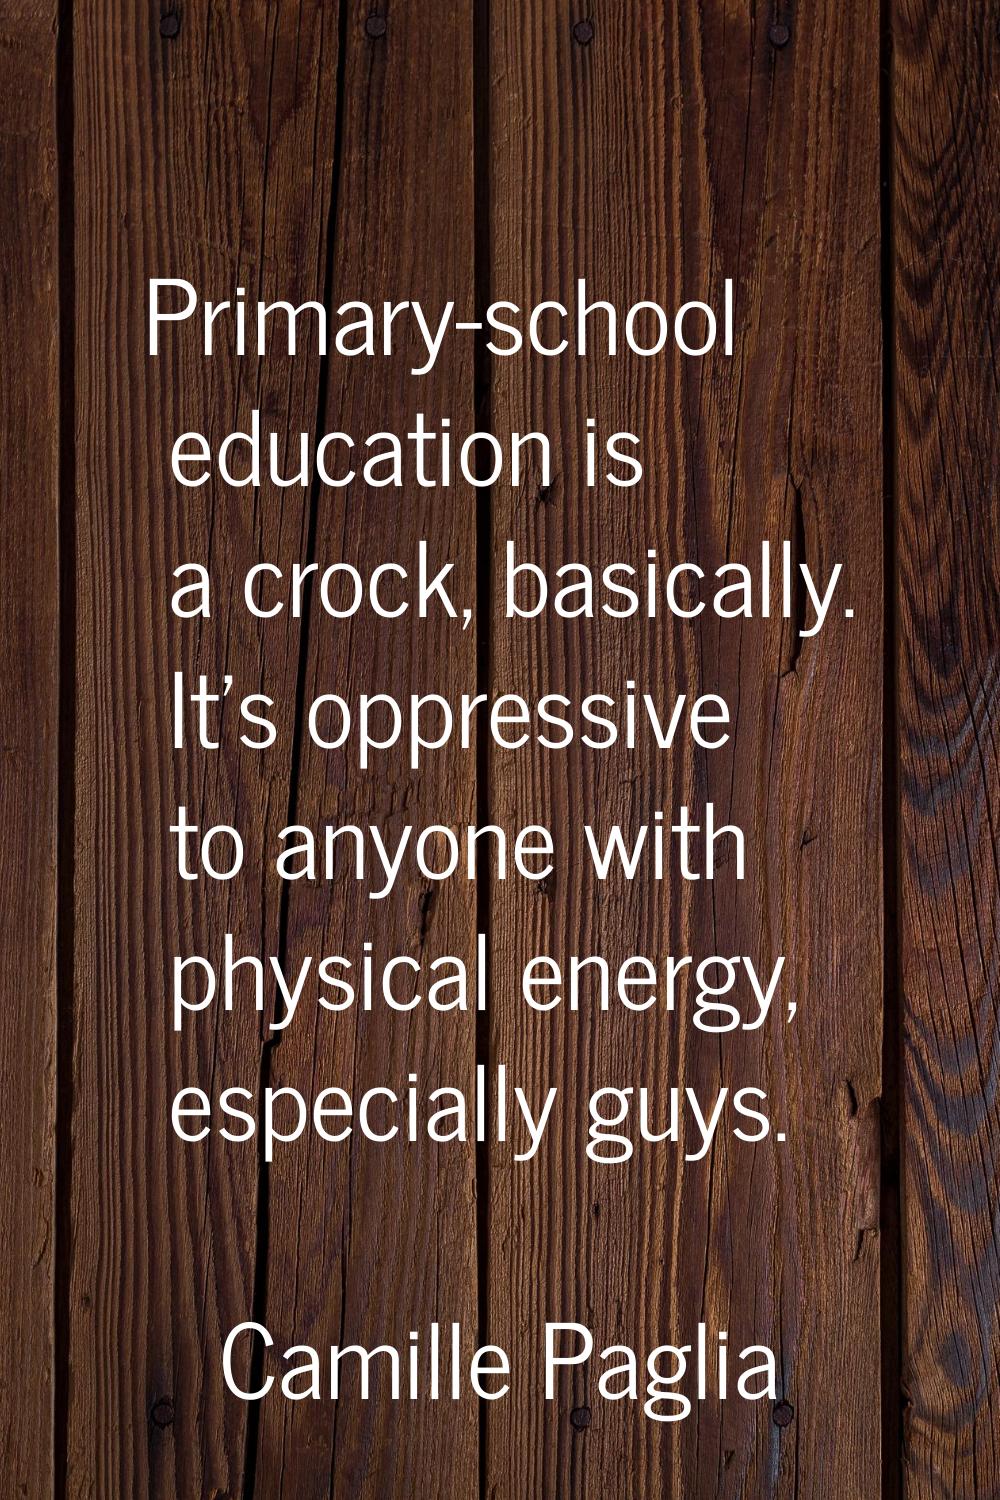 Primary-school education is a crock, basically. It's oppressive to anyone with physical energy, esp